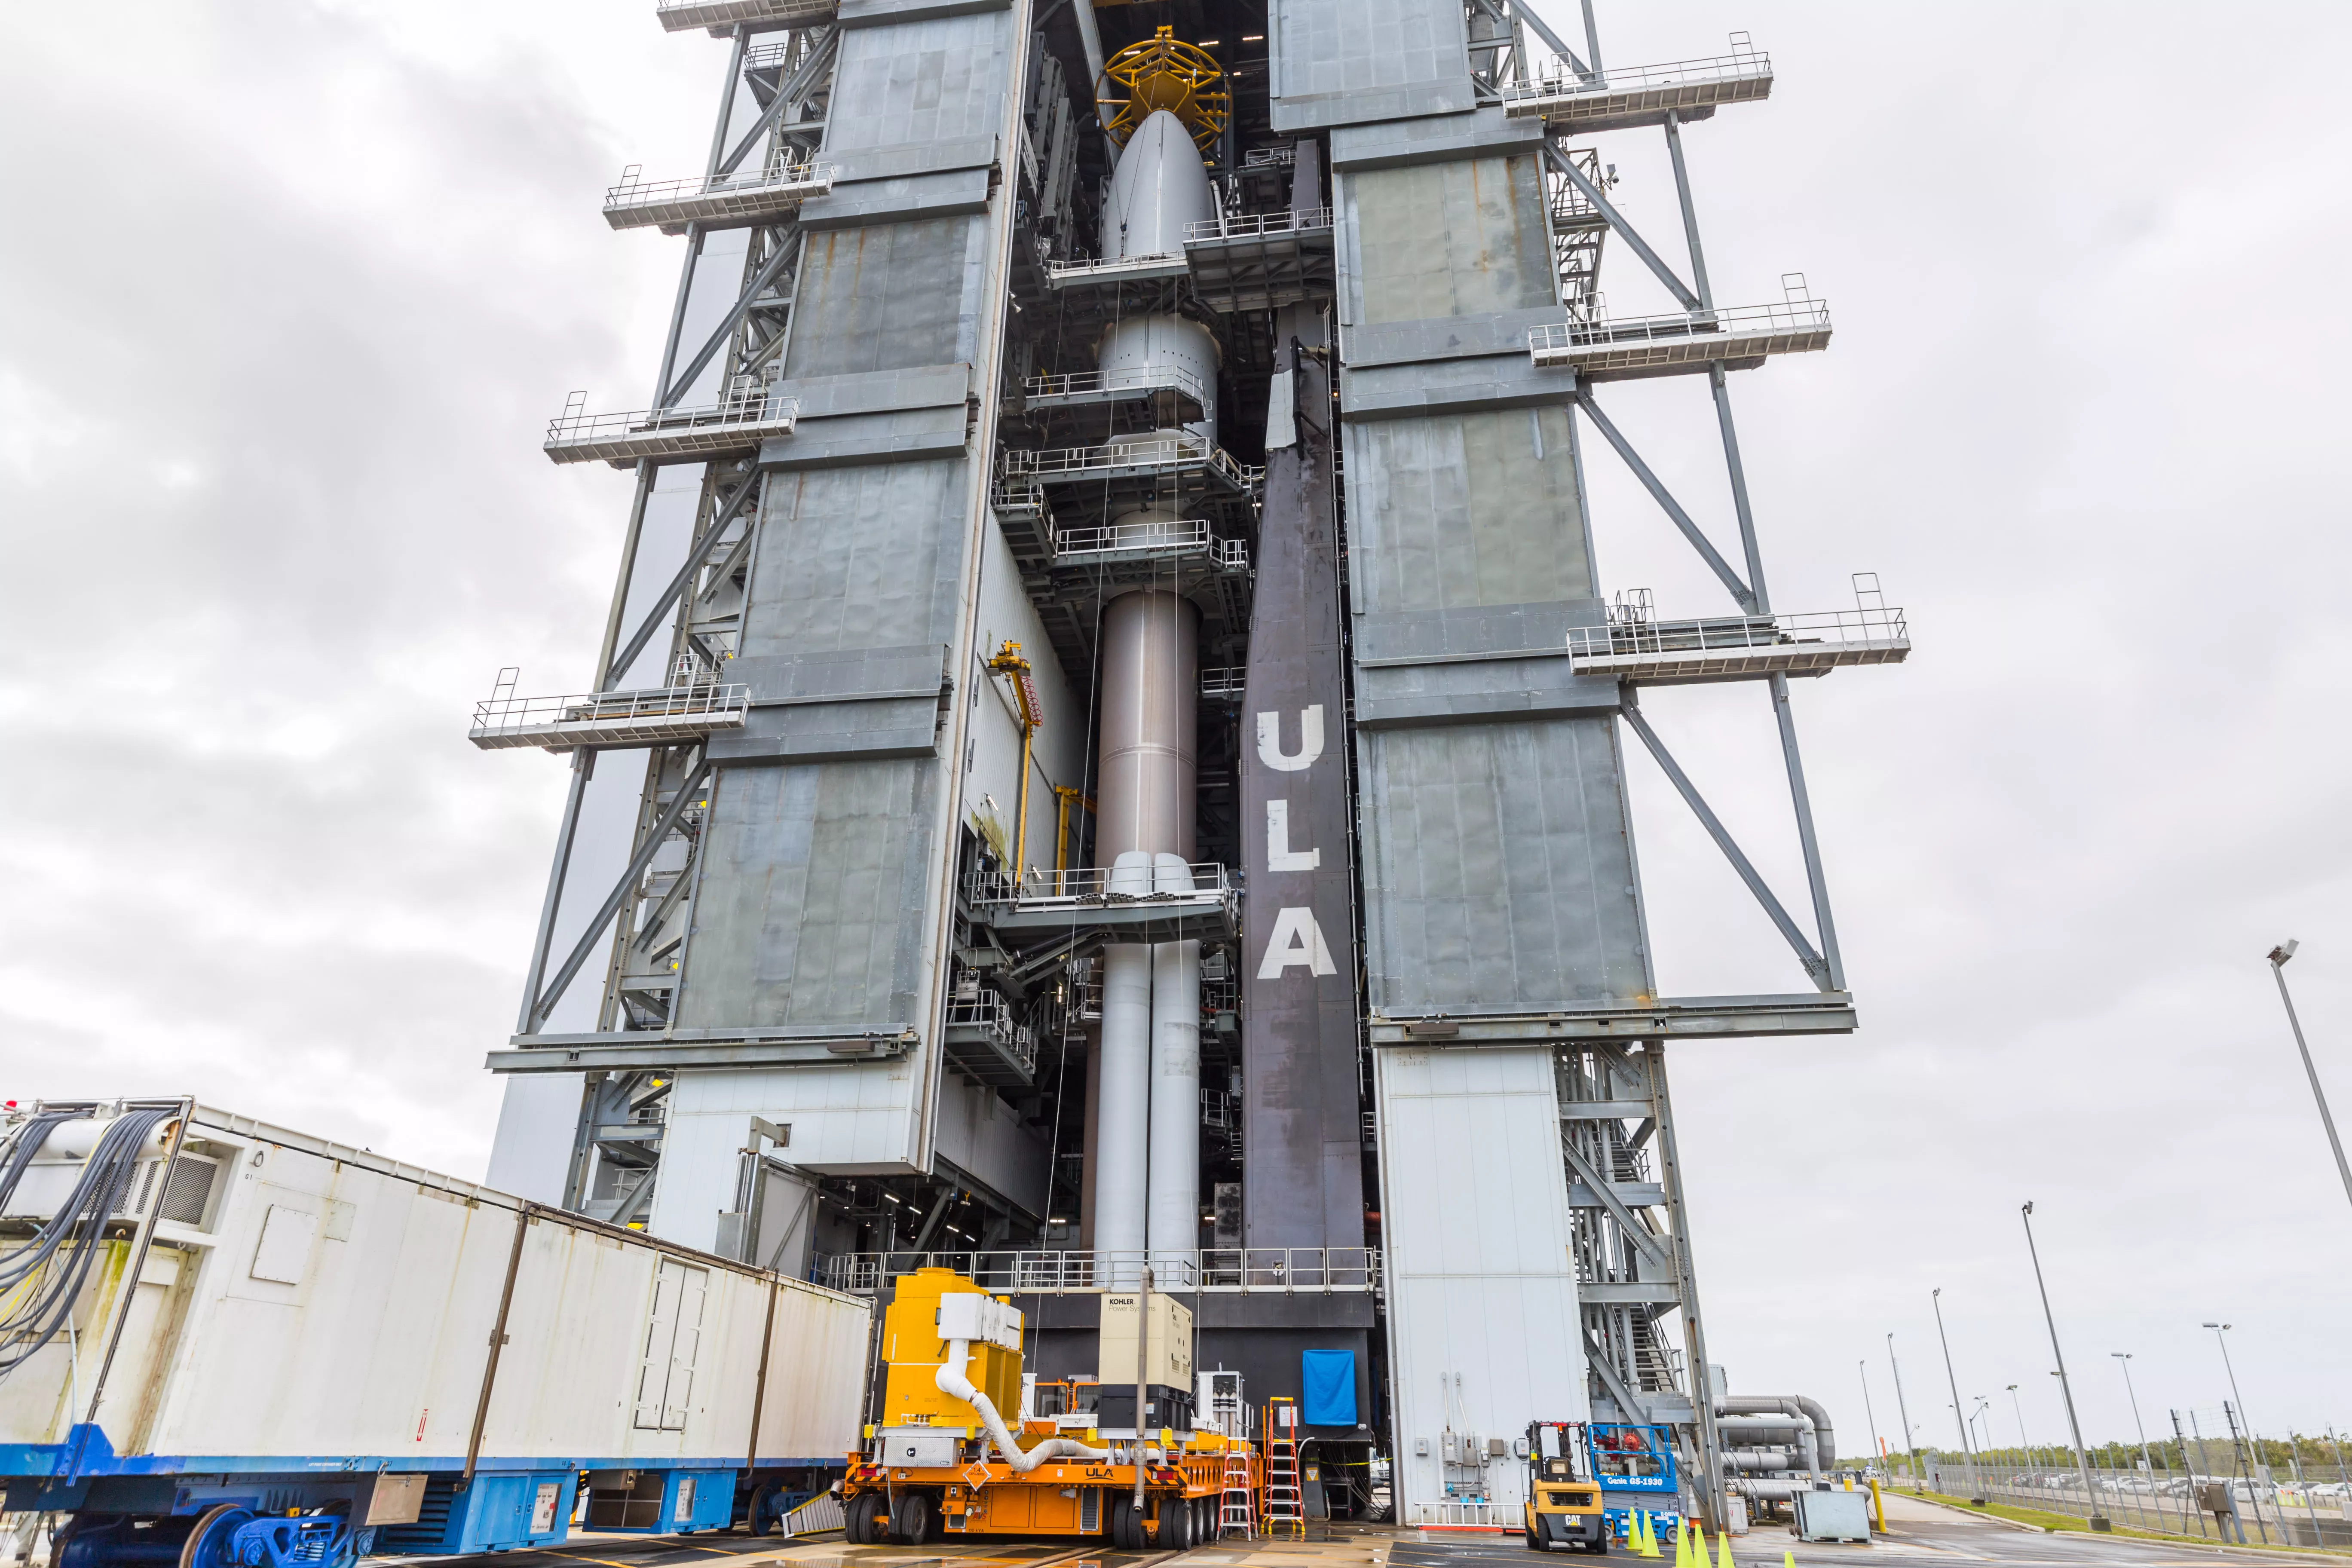 GOES-T Mated to Launch Vehicle